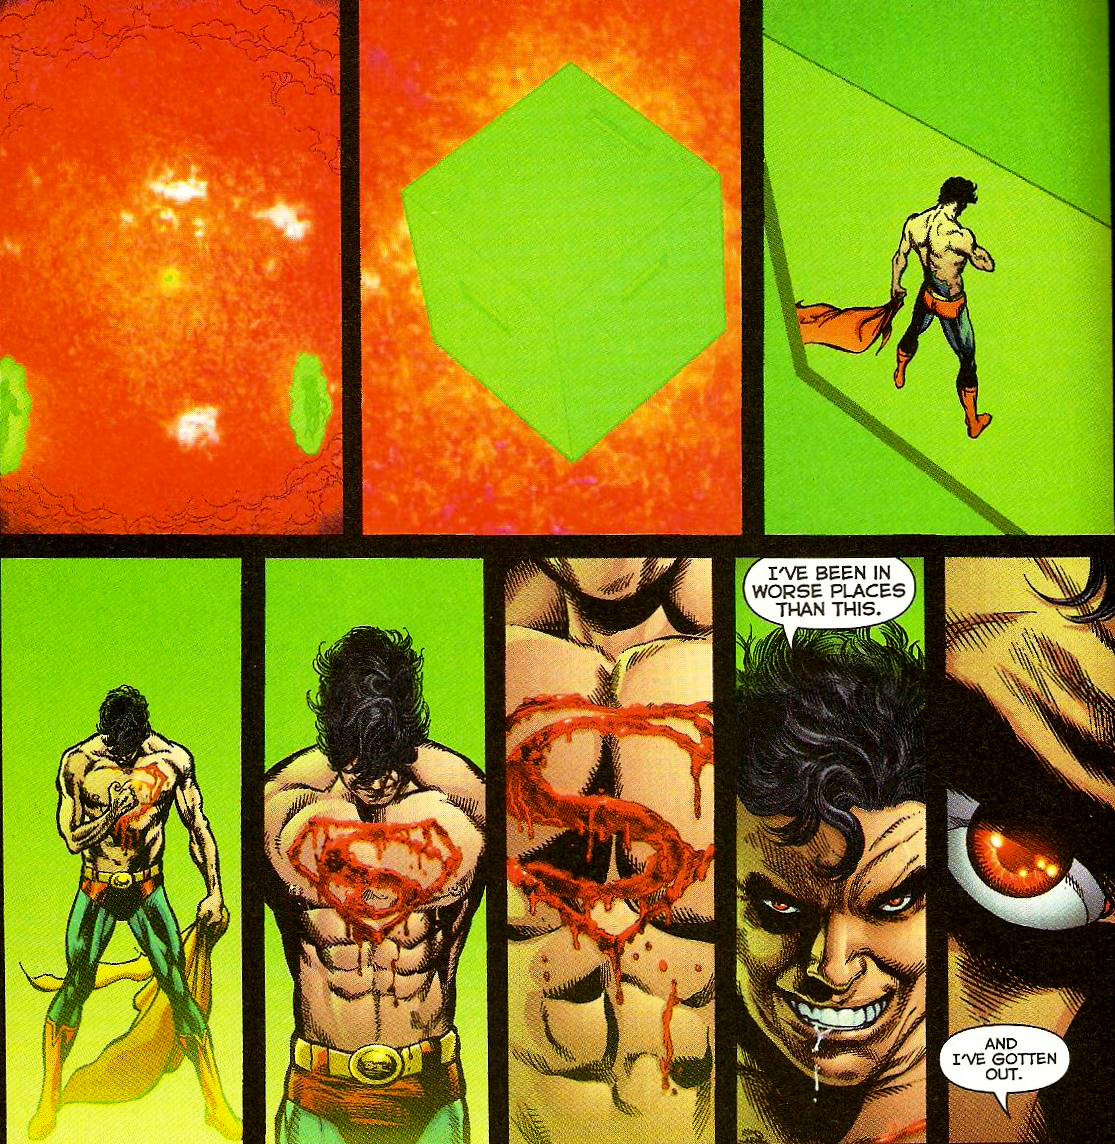 From Infinite Crisis #7 (2006)